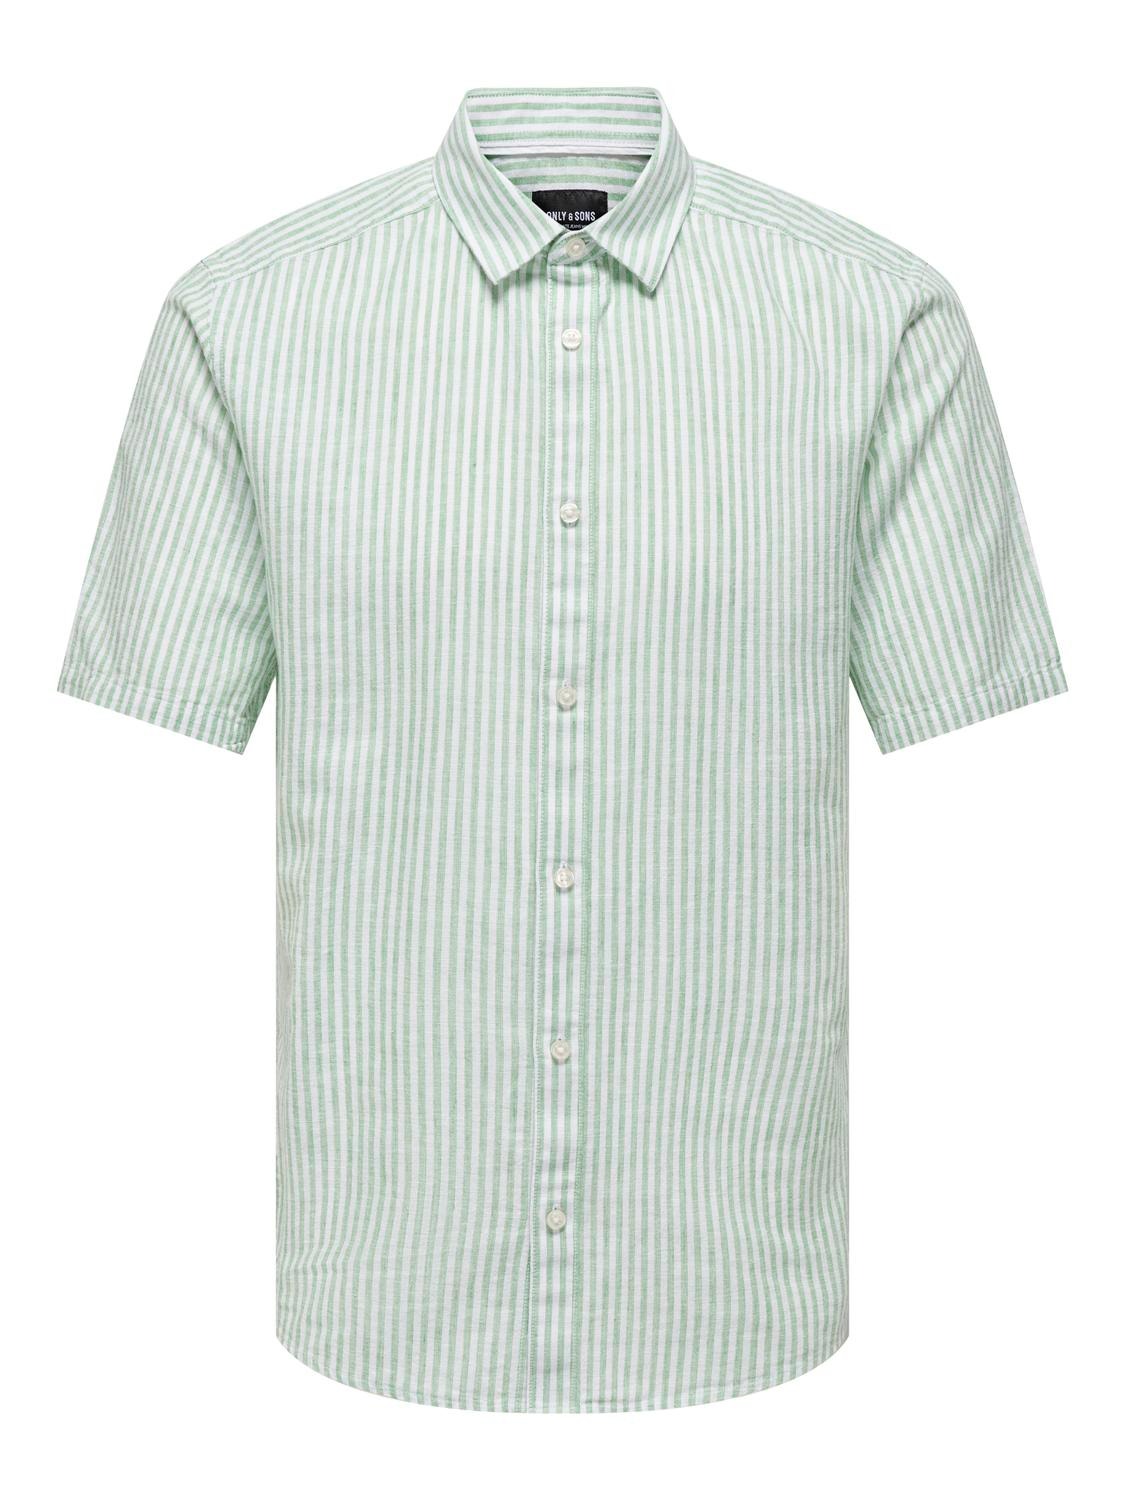 ONLY & SONS Shirt with short sleeves -Greenbriar - 22028416